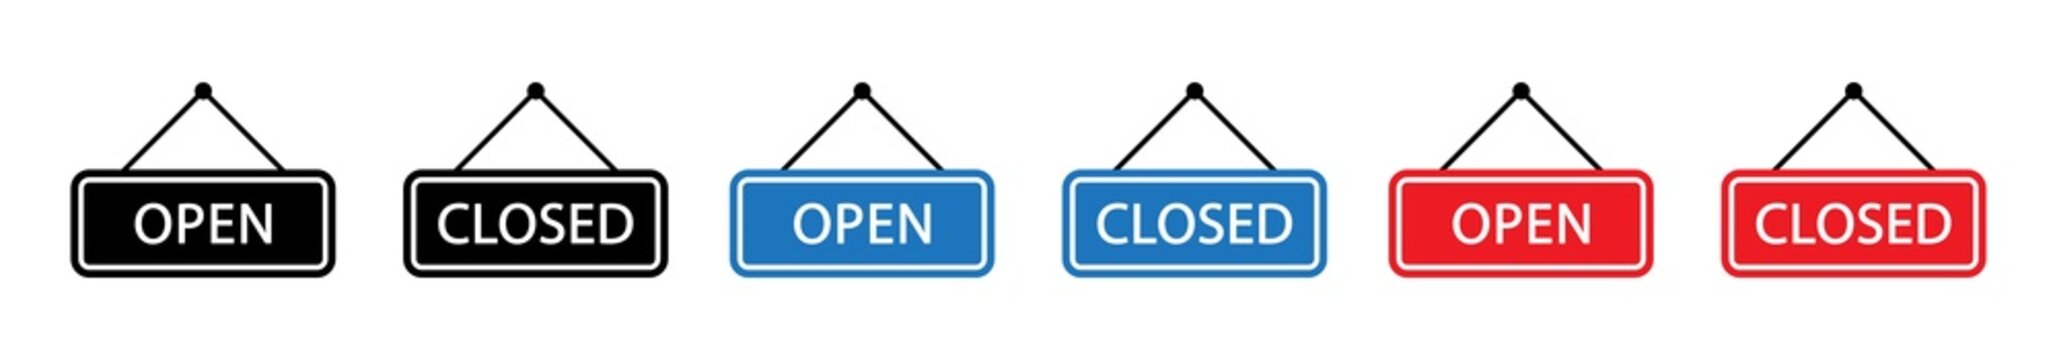 Open and closed sign set icon vector illustration